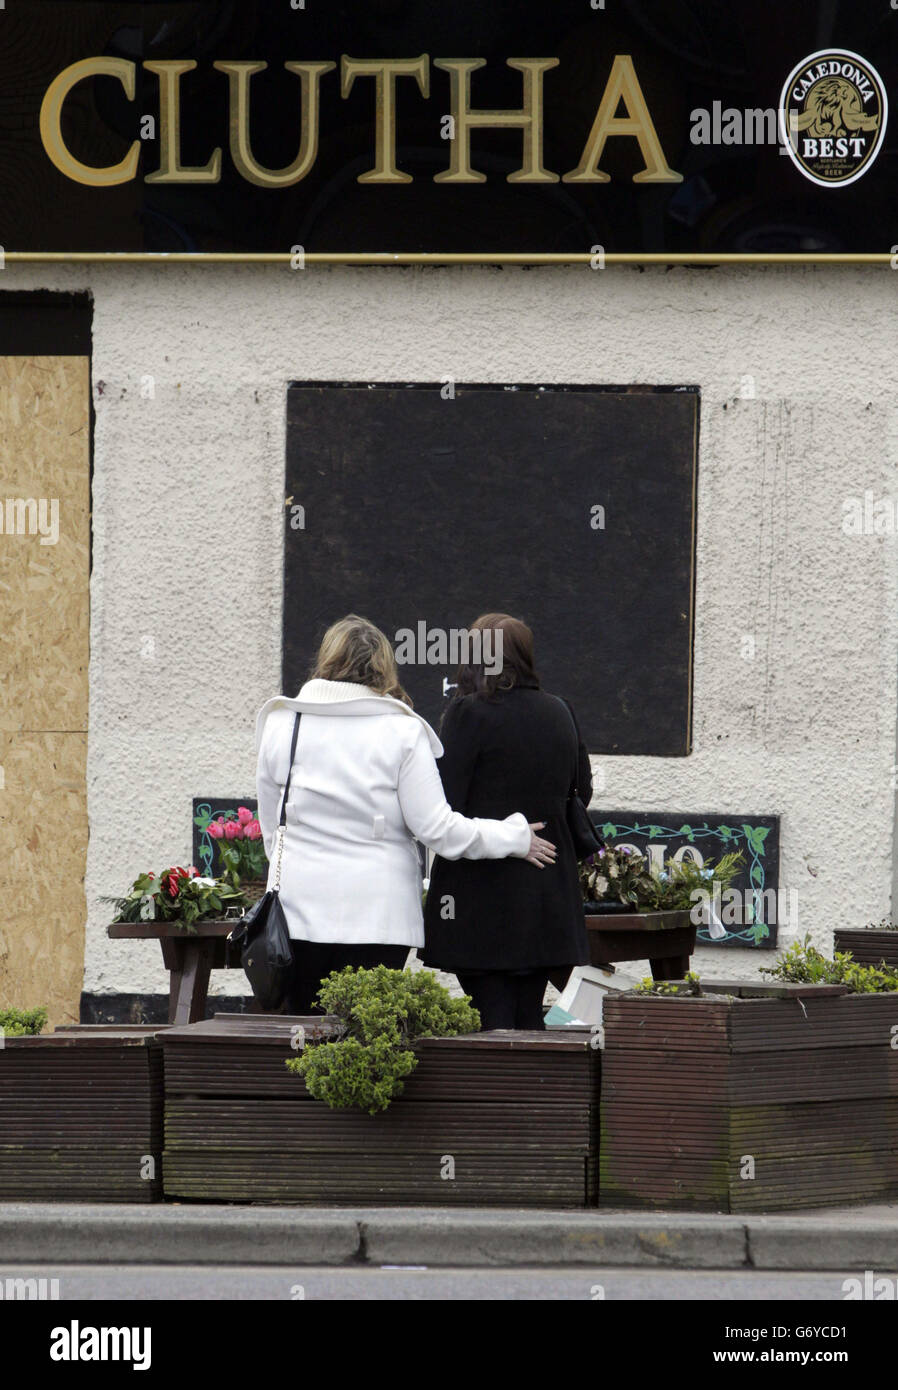 Flowers are laid at the Clutha bar in Glasgow, Scotland, four months after 10 people died following a helicopter accident. Stock Photo